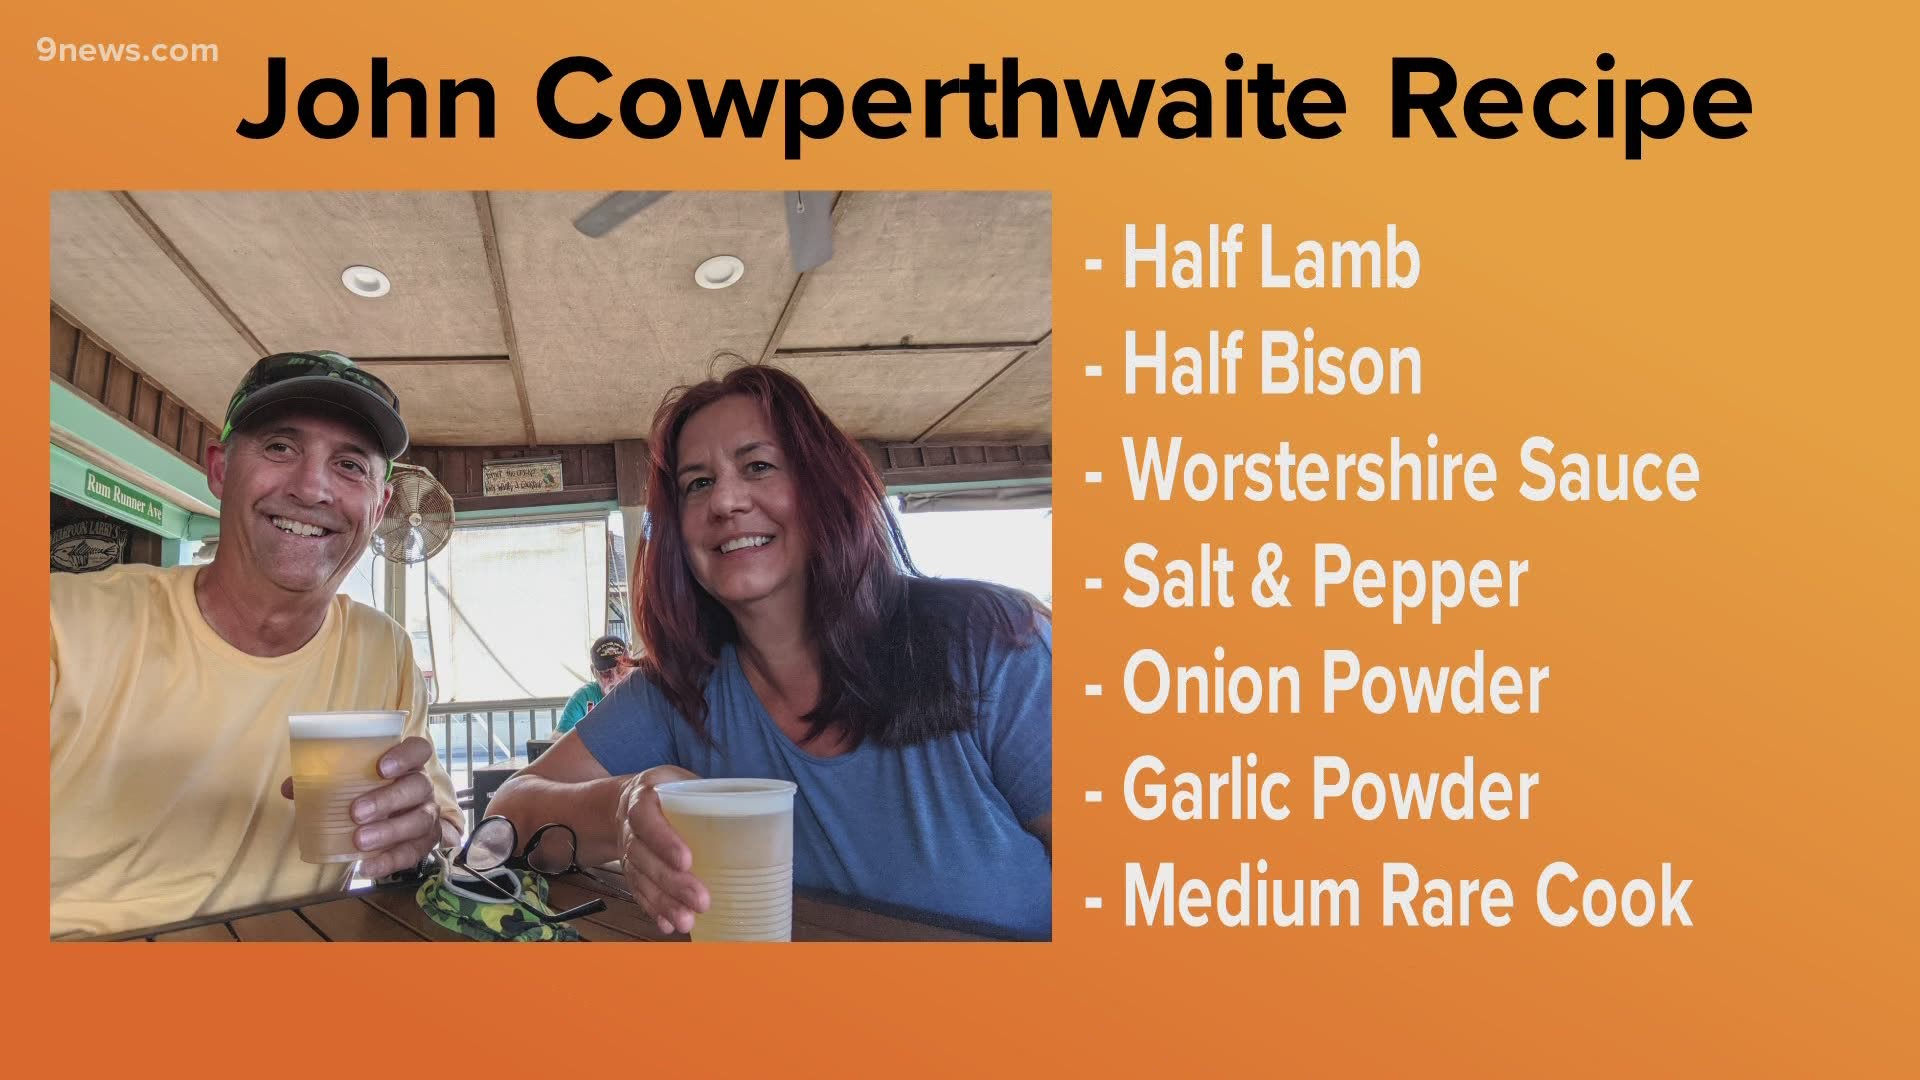 Mile High Mornings asked viewers for their favorite burger recipes, and we're sharing this one from John Cowperthwaite.